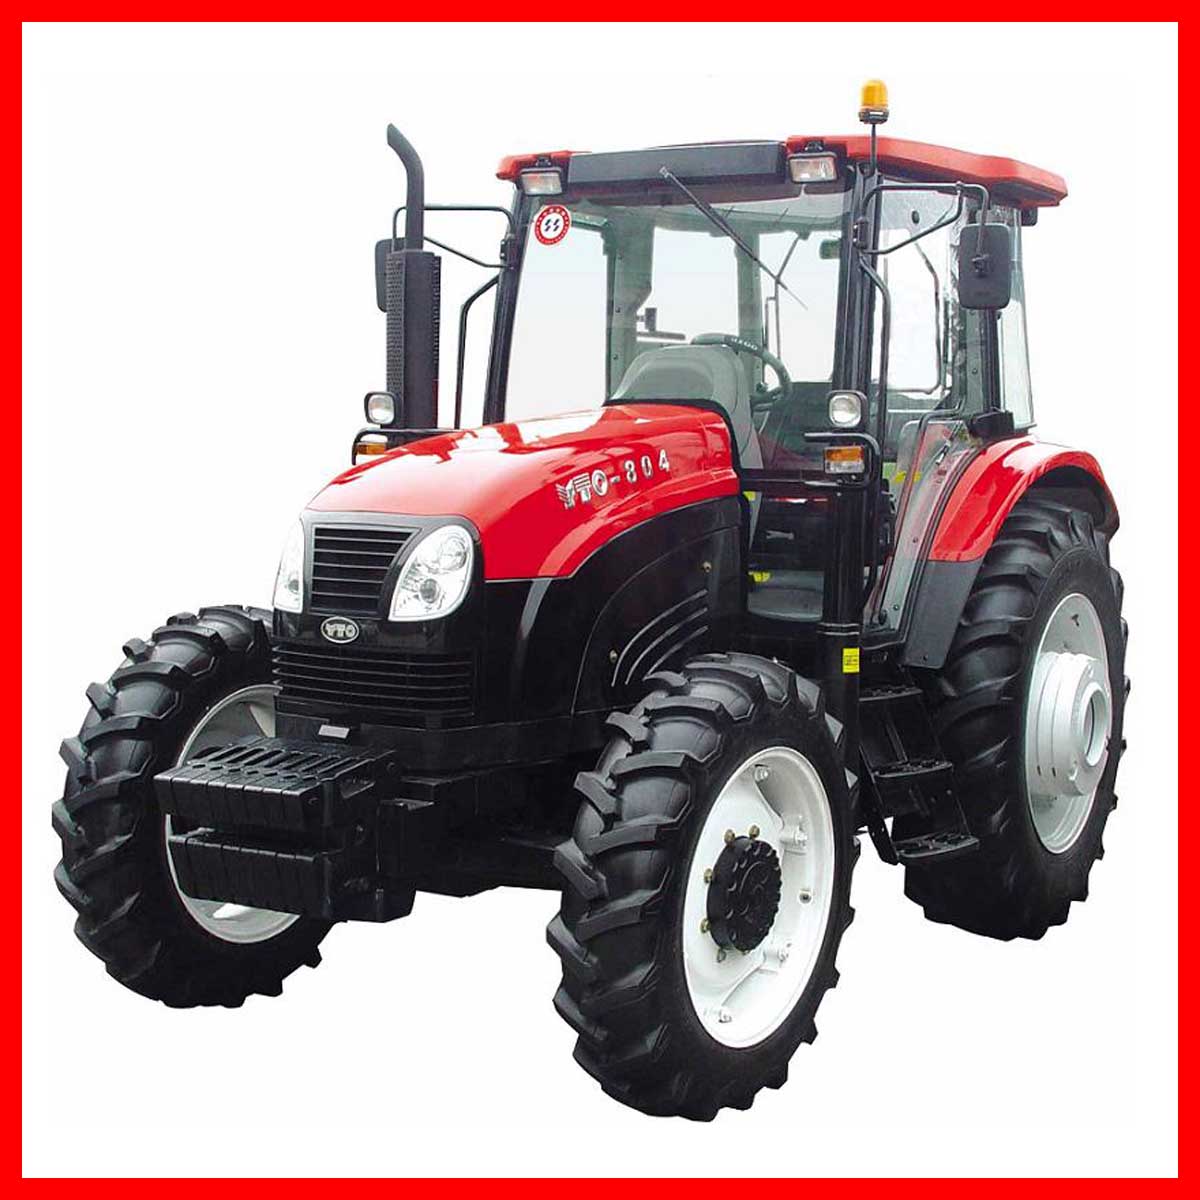 ... 4WD Yto Farm Tractor, Agricultural Tractor, Wheeled Tractor (YTO-X804